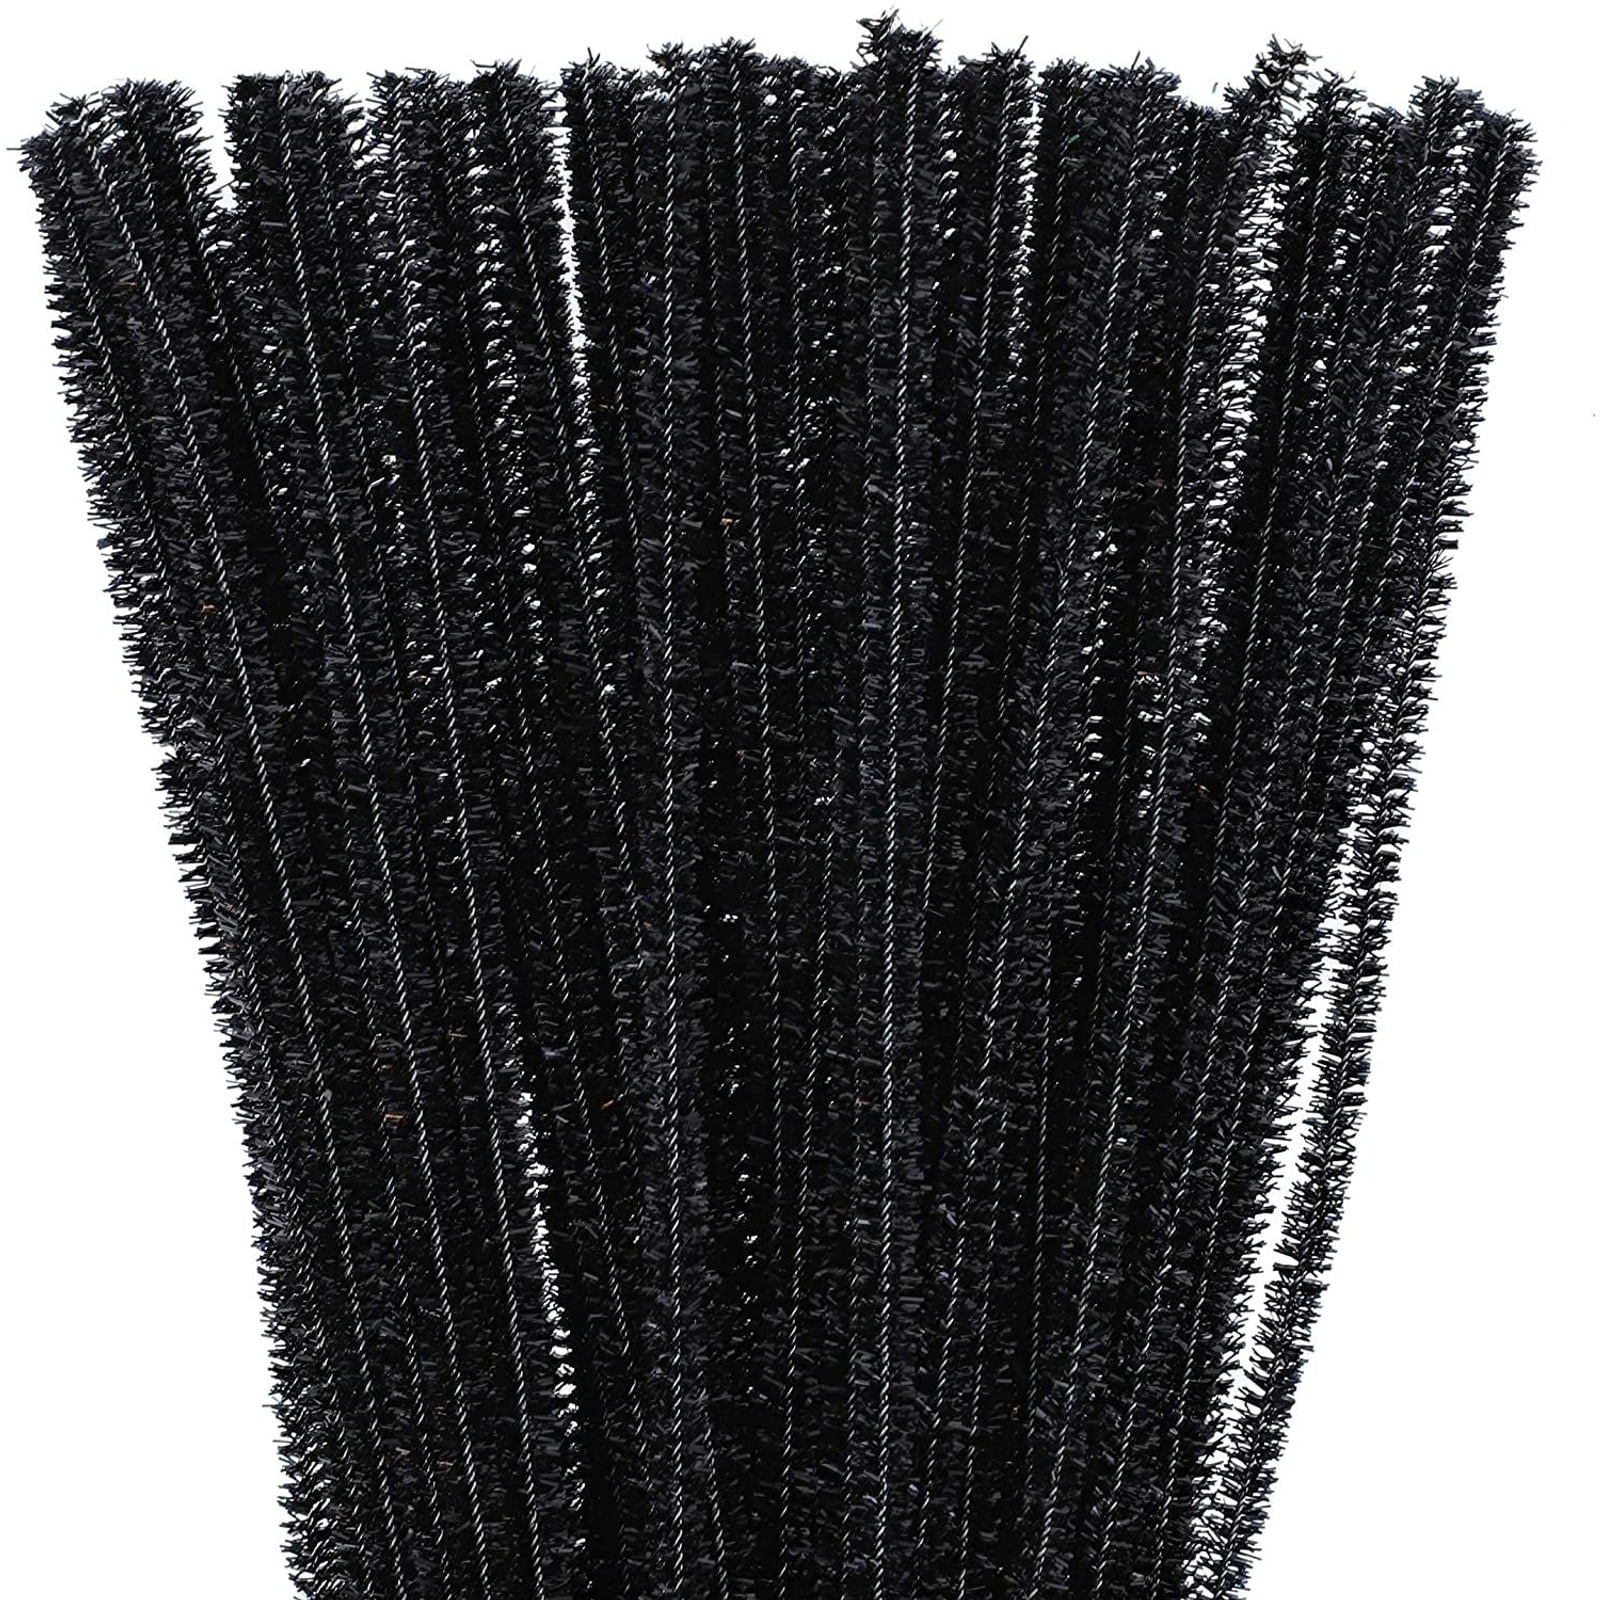 25 PIECES OF  30cm LONG PIPE CLEANER CHENILLE STICKS  FUZZY STEM MIXED COLOR 